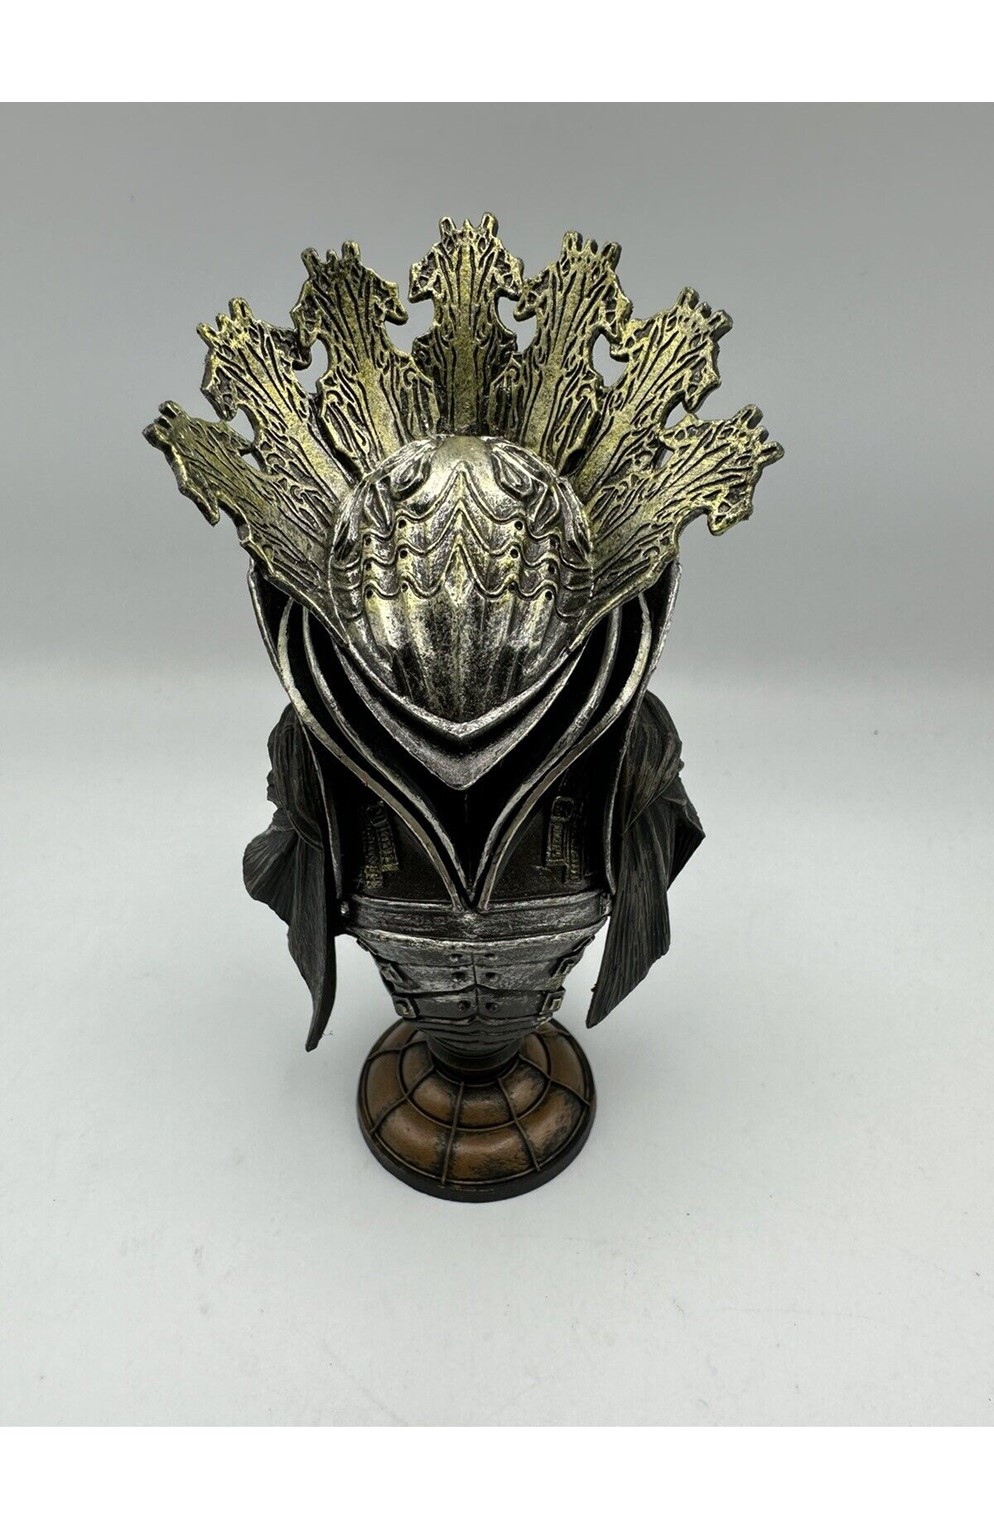 Final Fantasy 12 Zodiac Collector's Edition Bust Bergan Pre-Owned